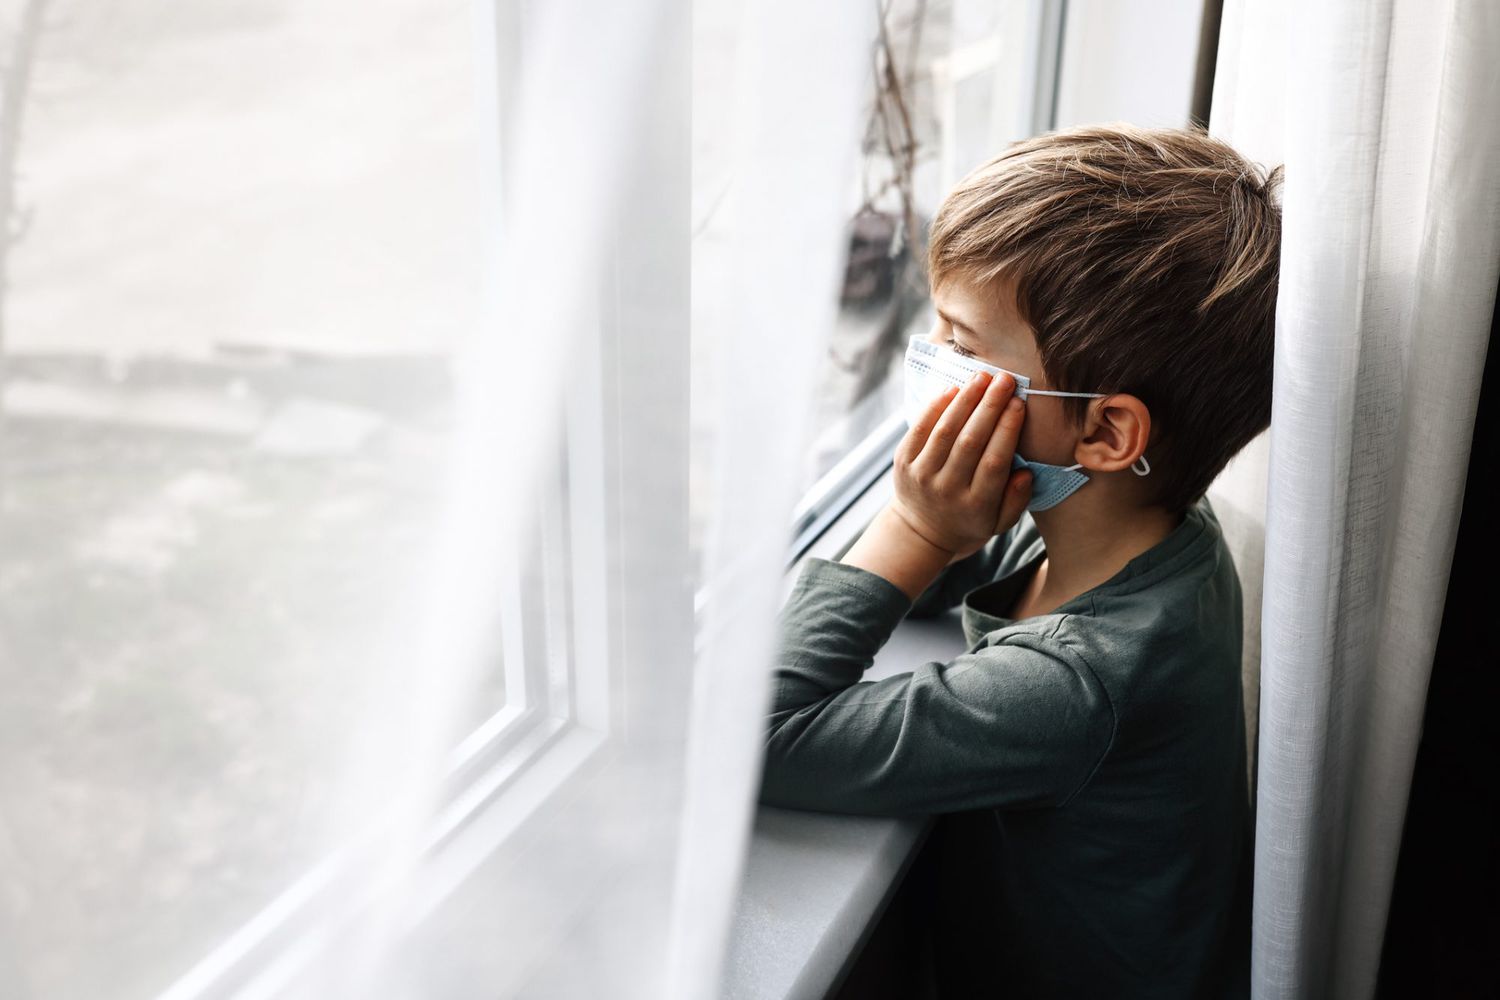 An image of a boy looking out a window with a mask on.